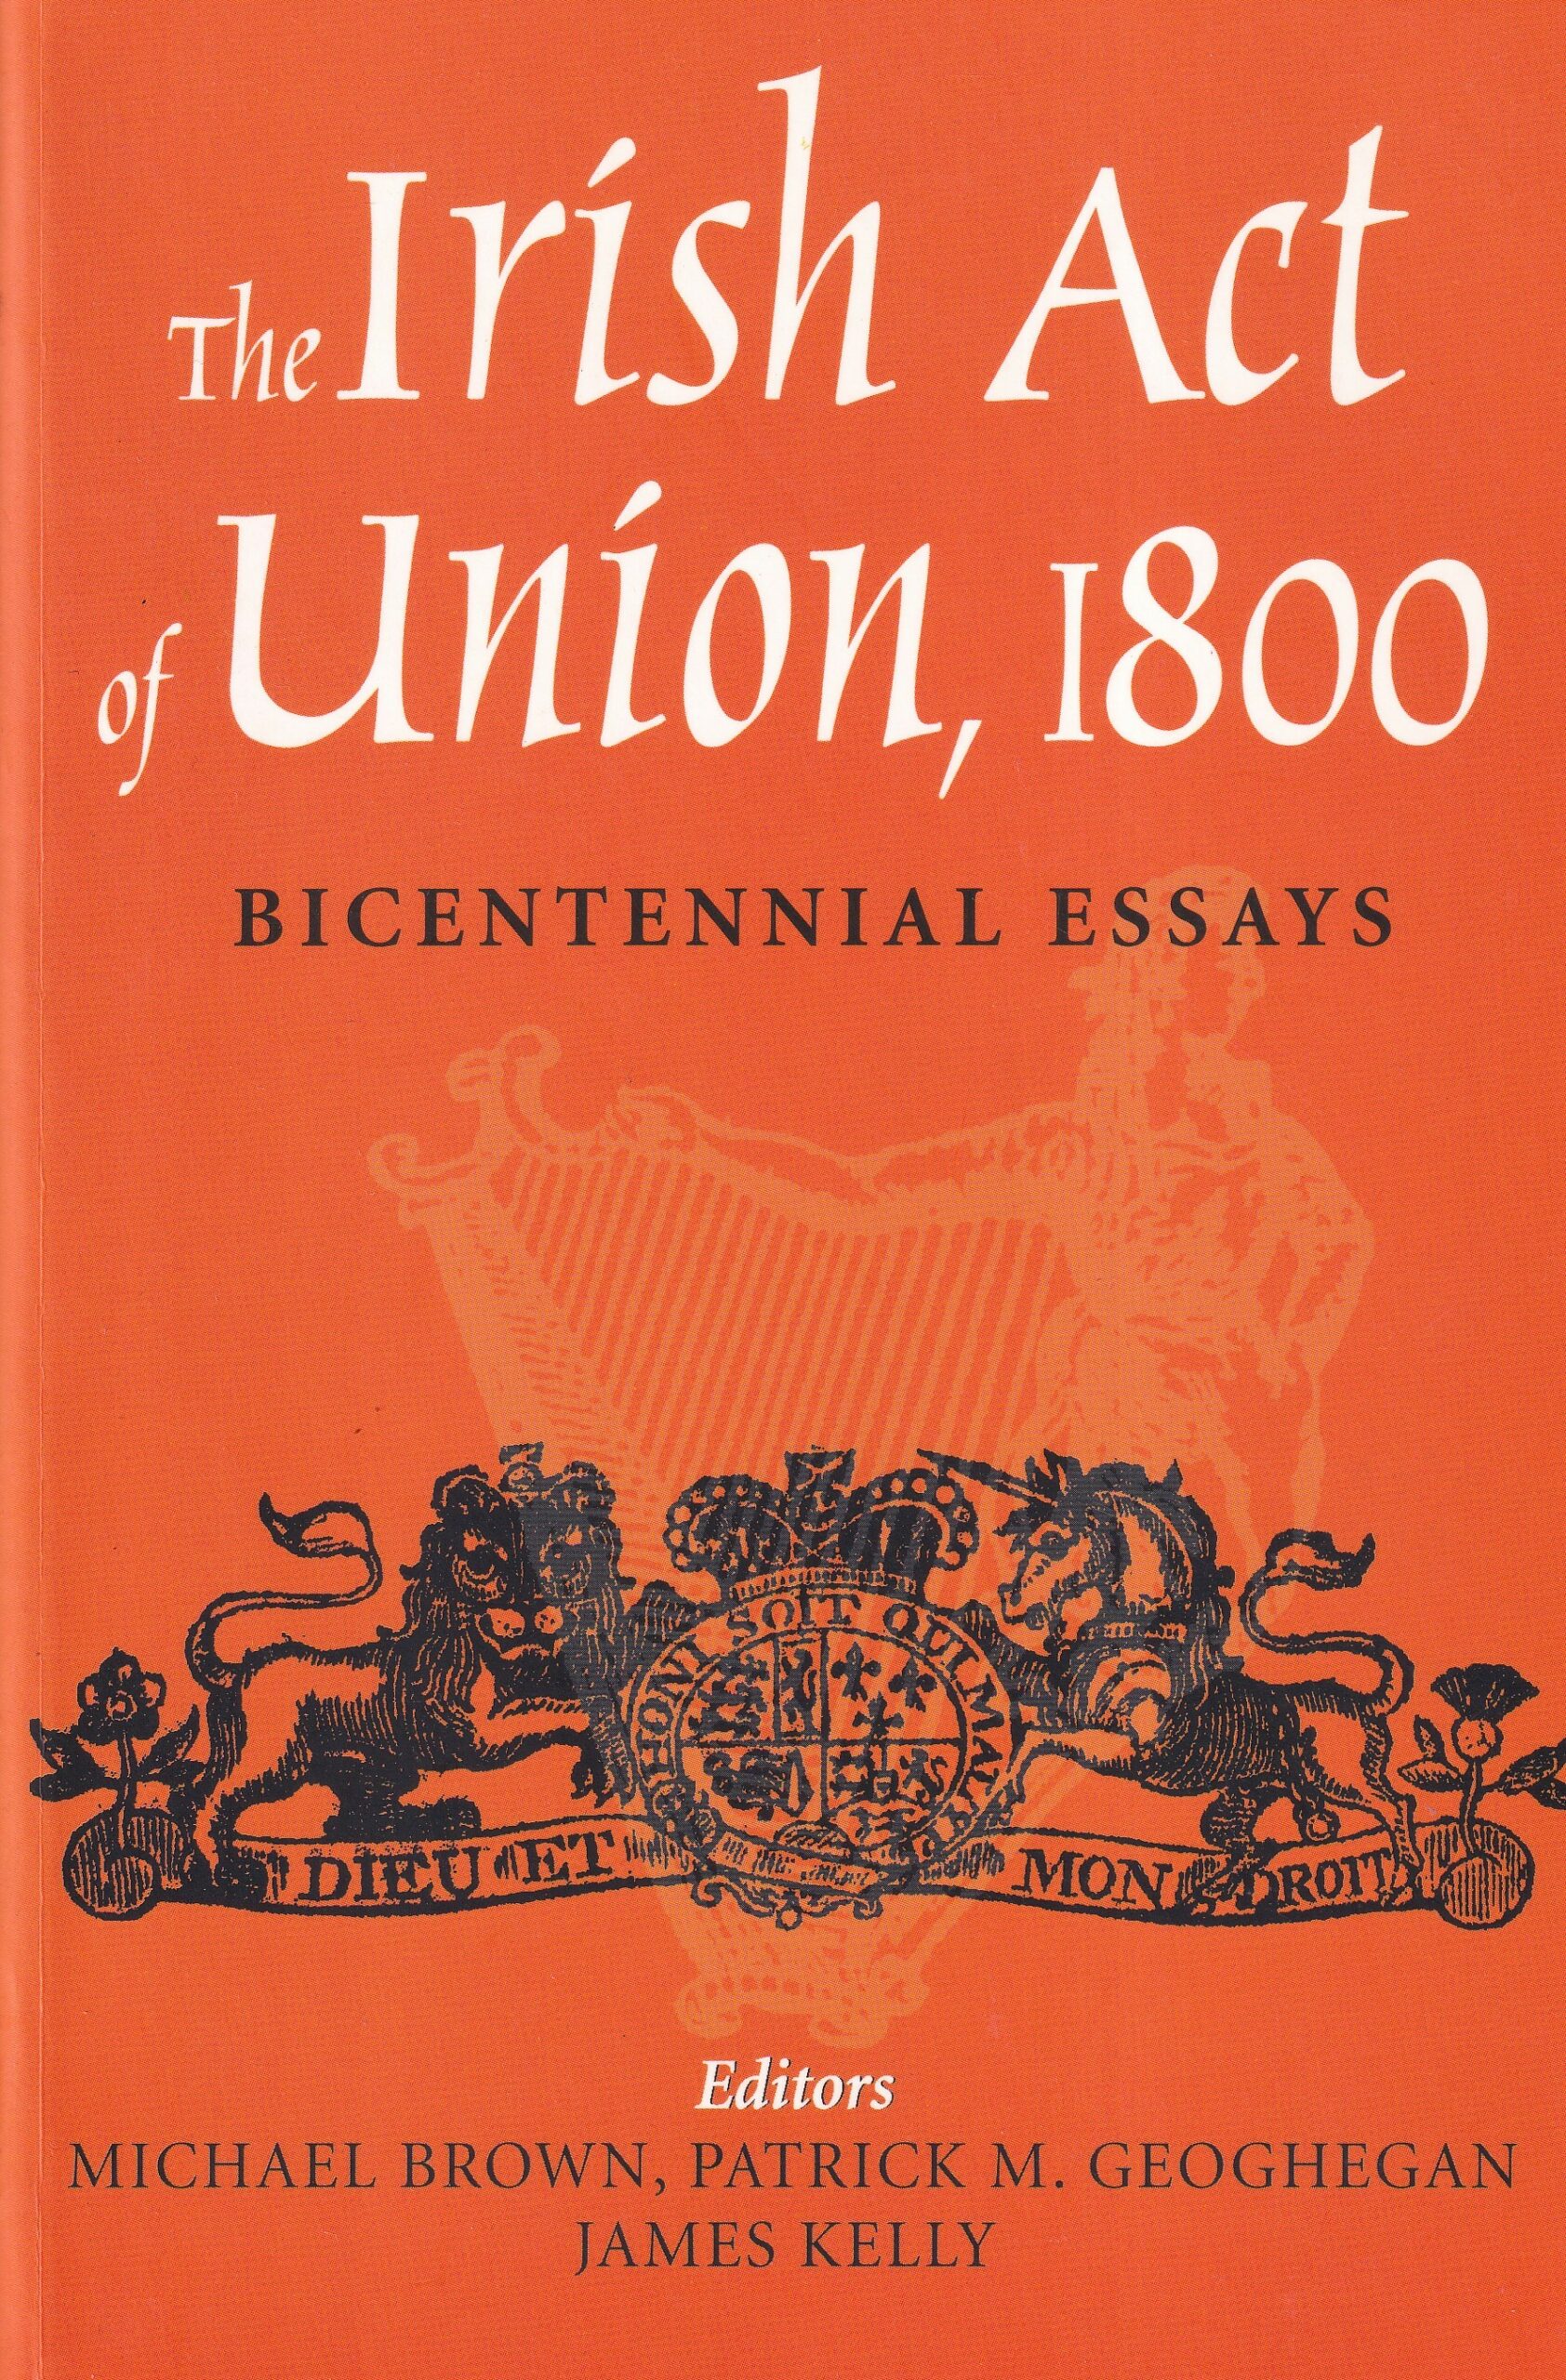 The Irish Act of Union, 1800 : Bicentennial Essays by Michael Brown, Patrick M. Geoghan, James Kelly (eds.)